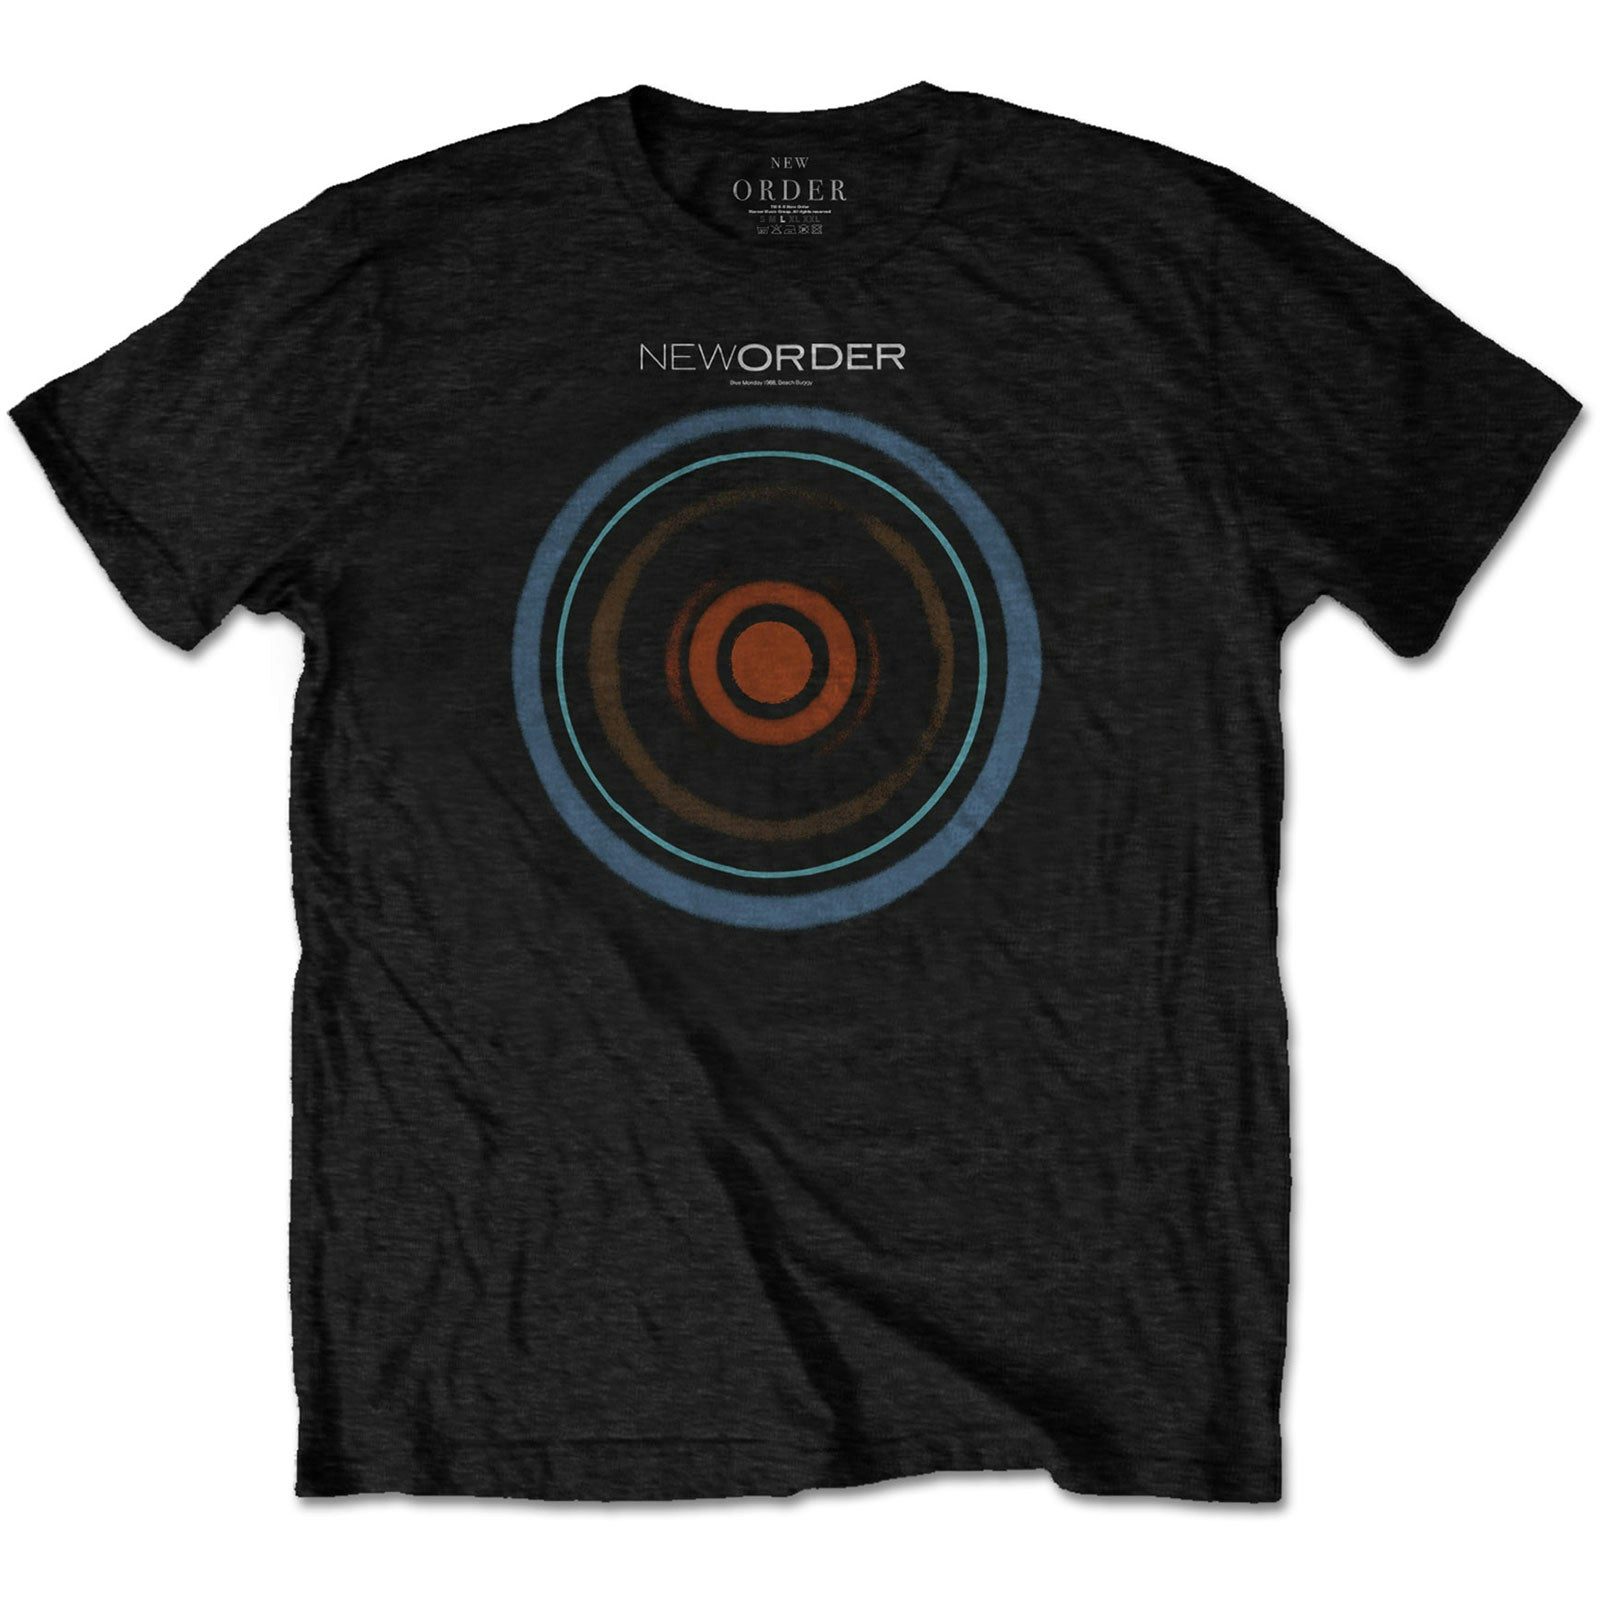 New Order Merch, Shirts, Posters, Hoodies & Vinyl Albums Store